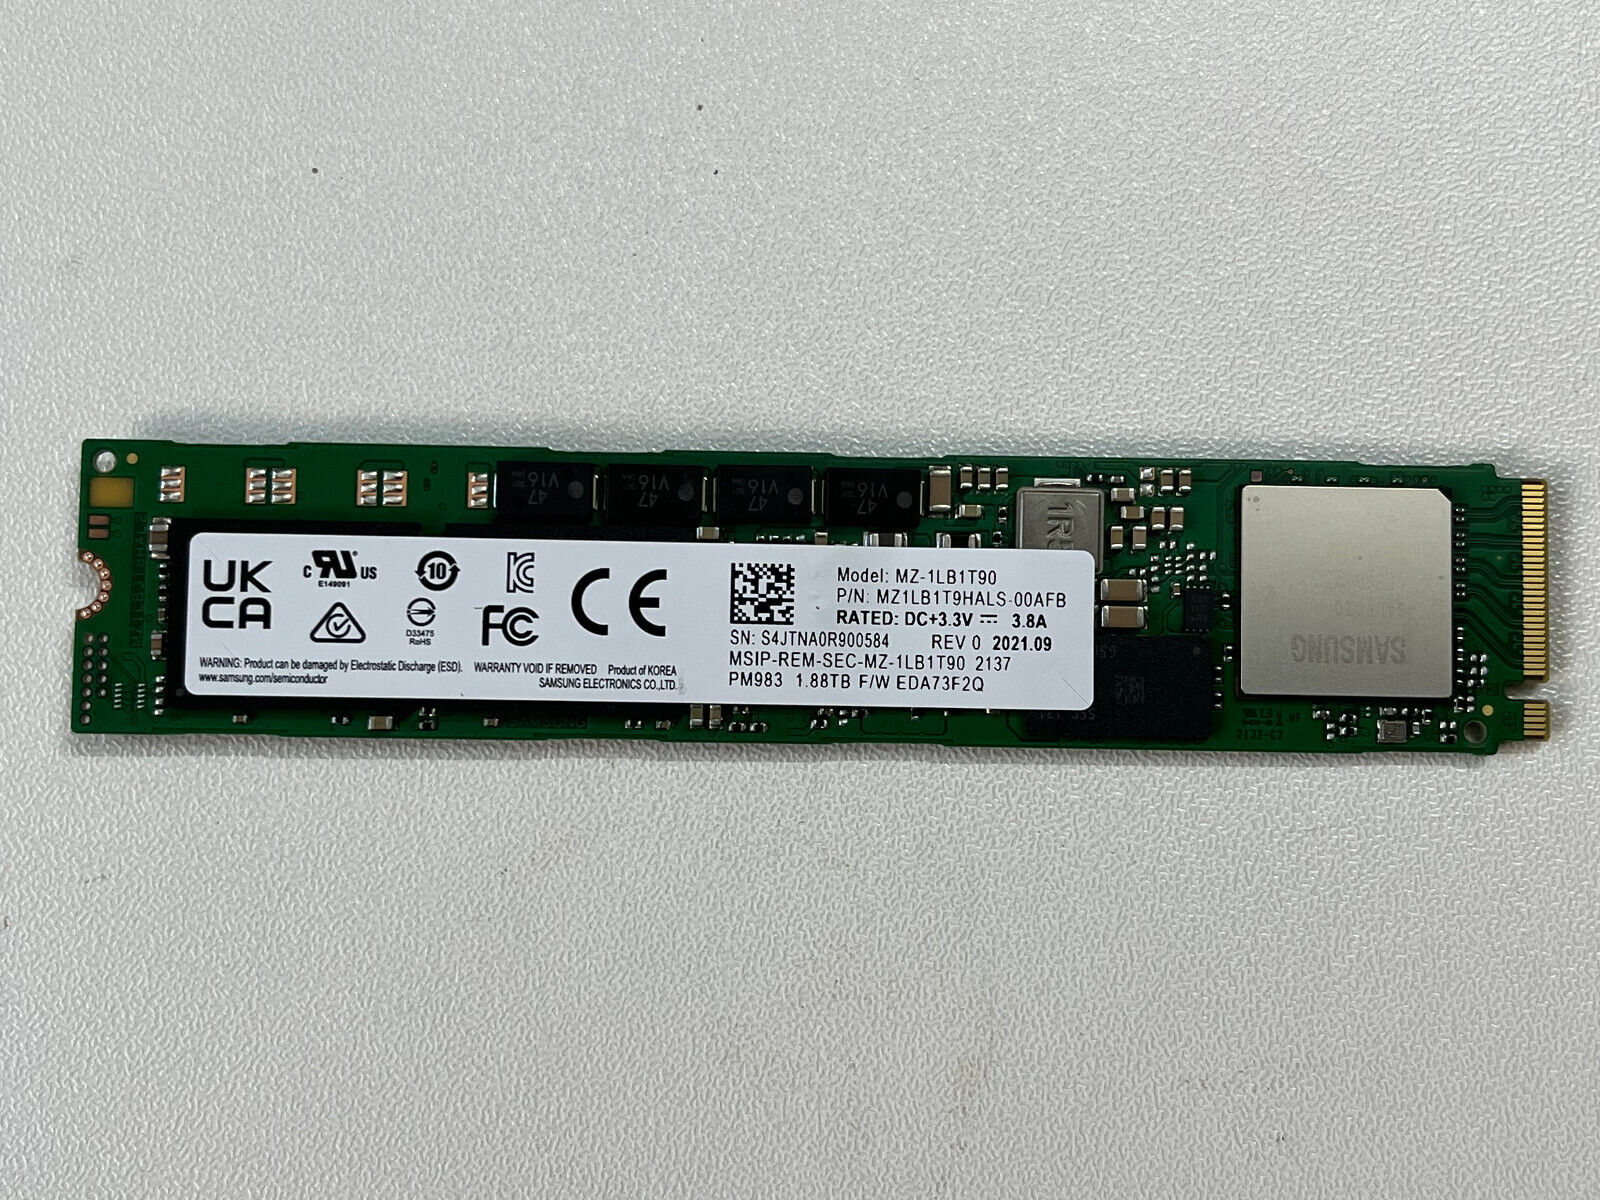 Samsung PM983 MZ-1LB1T90 1.88T SSD PCIe Gen4x4 NVMe M.2 22110 Solid State Drive